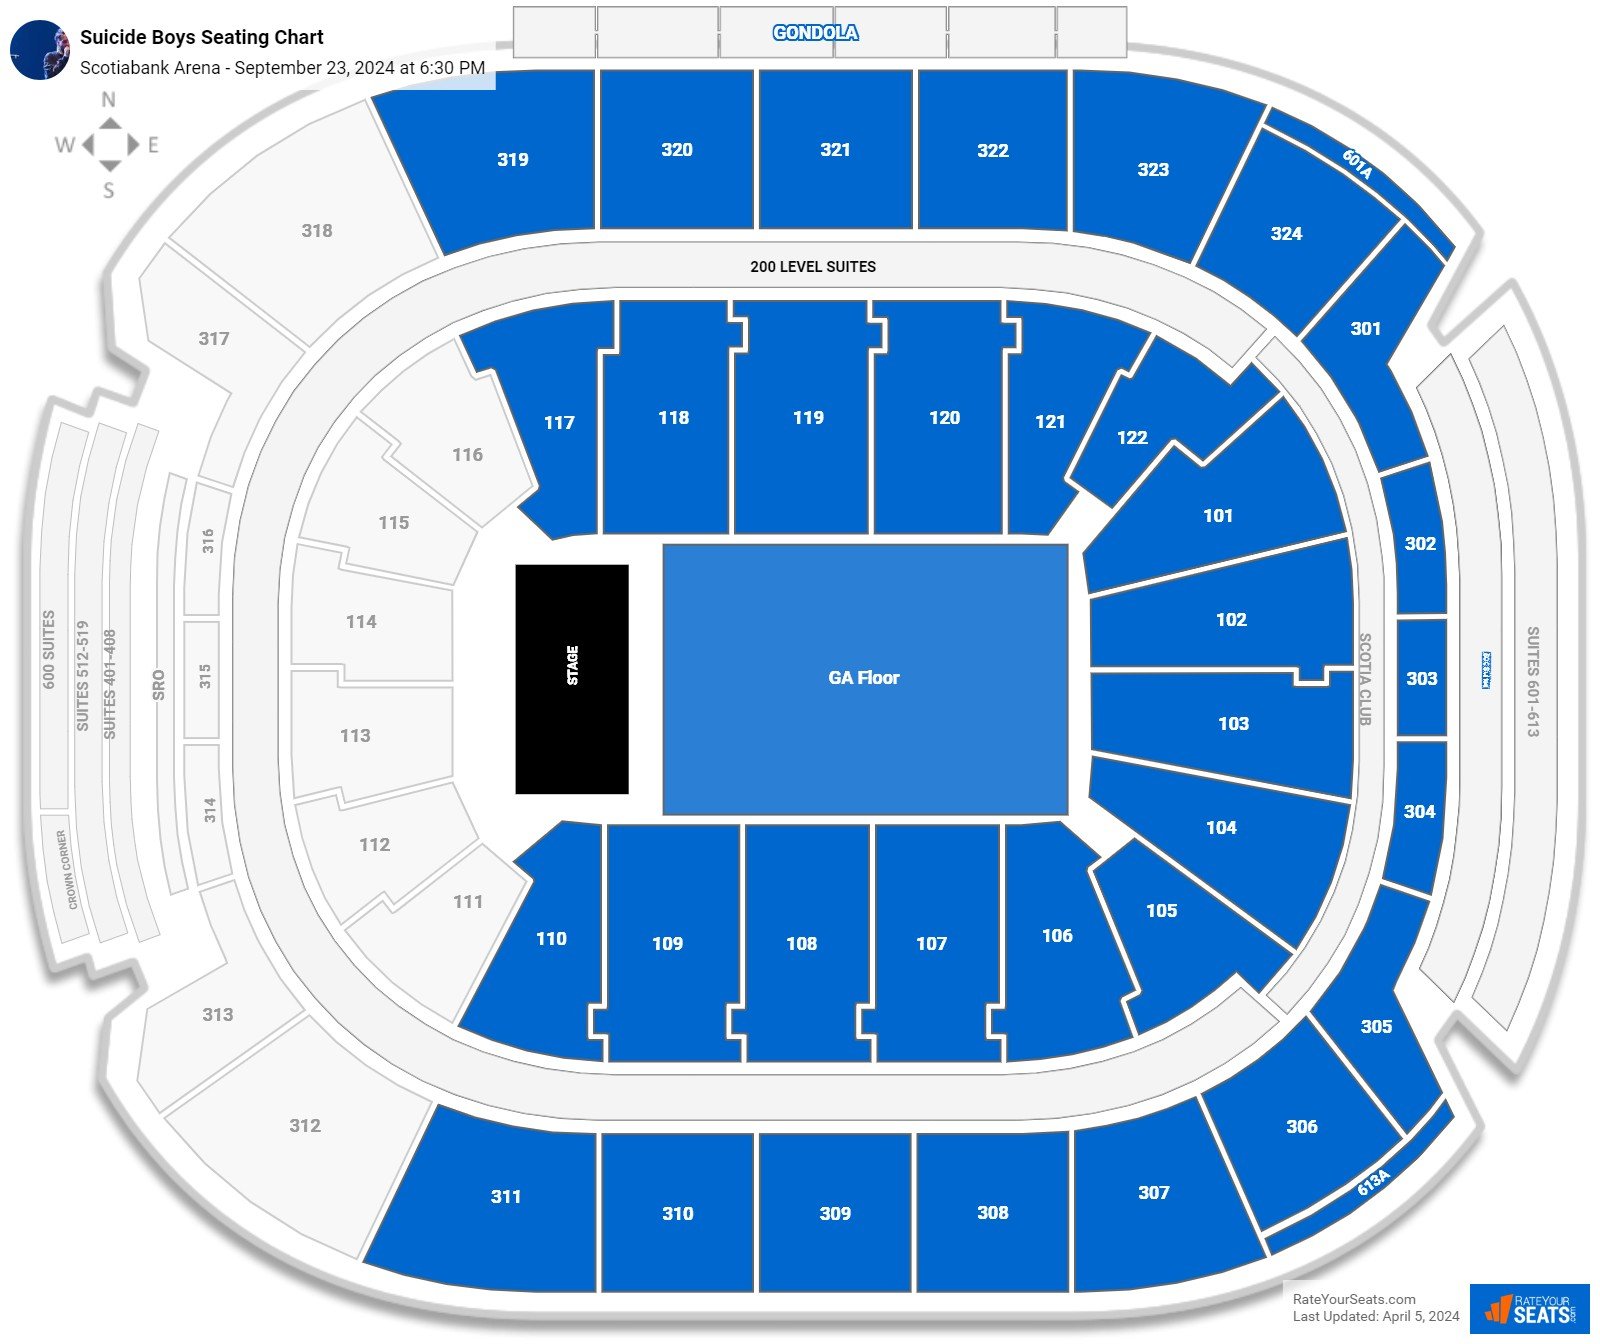 Suicide Boys seating chart Scotiabank Arena